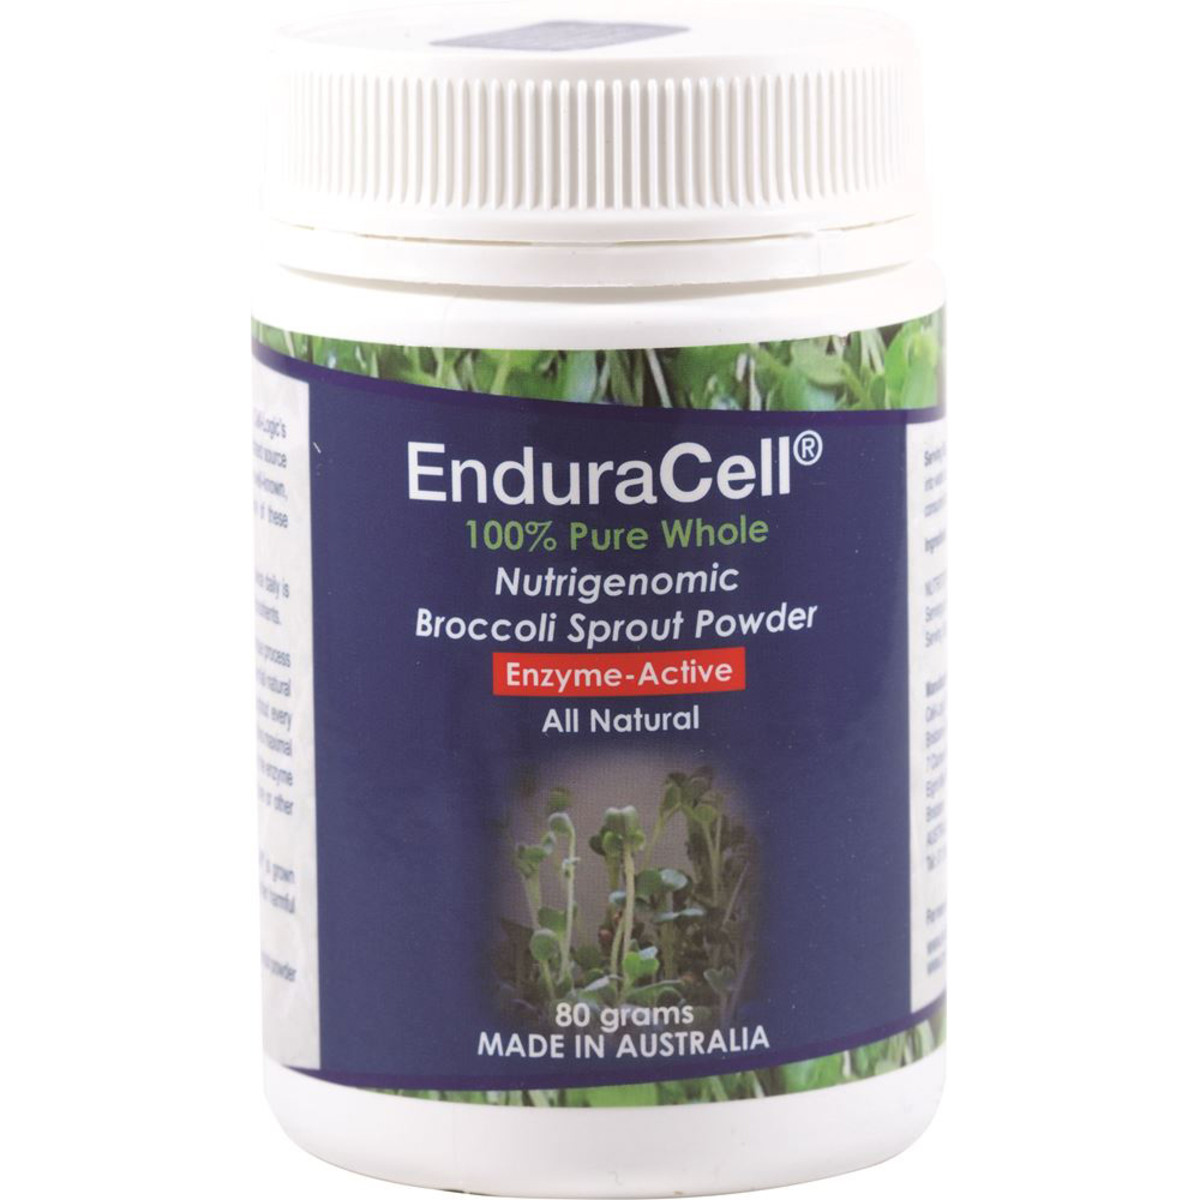 CELL LOGIC - EnduraCell Broccoli Sprout Powder 80g